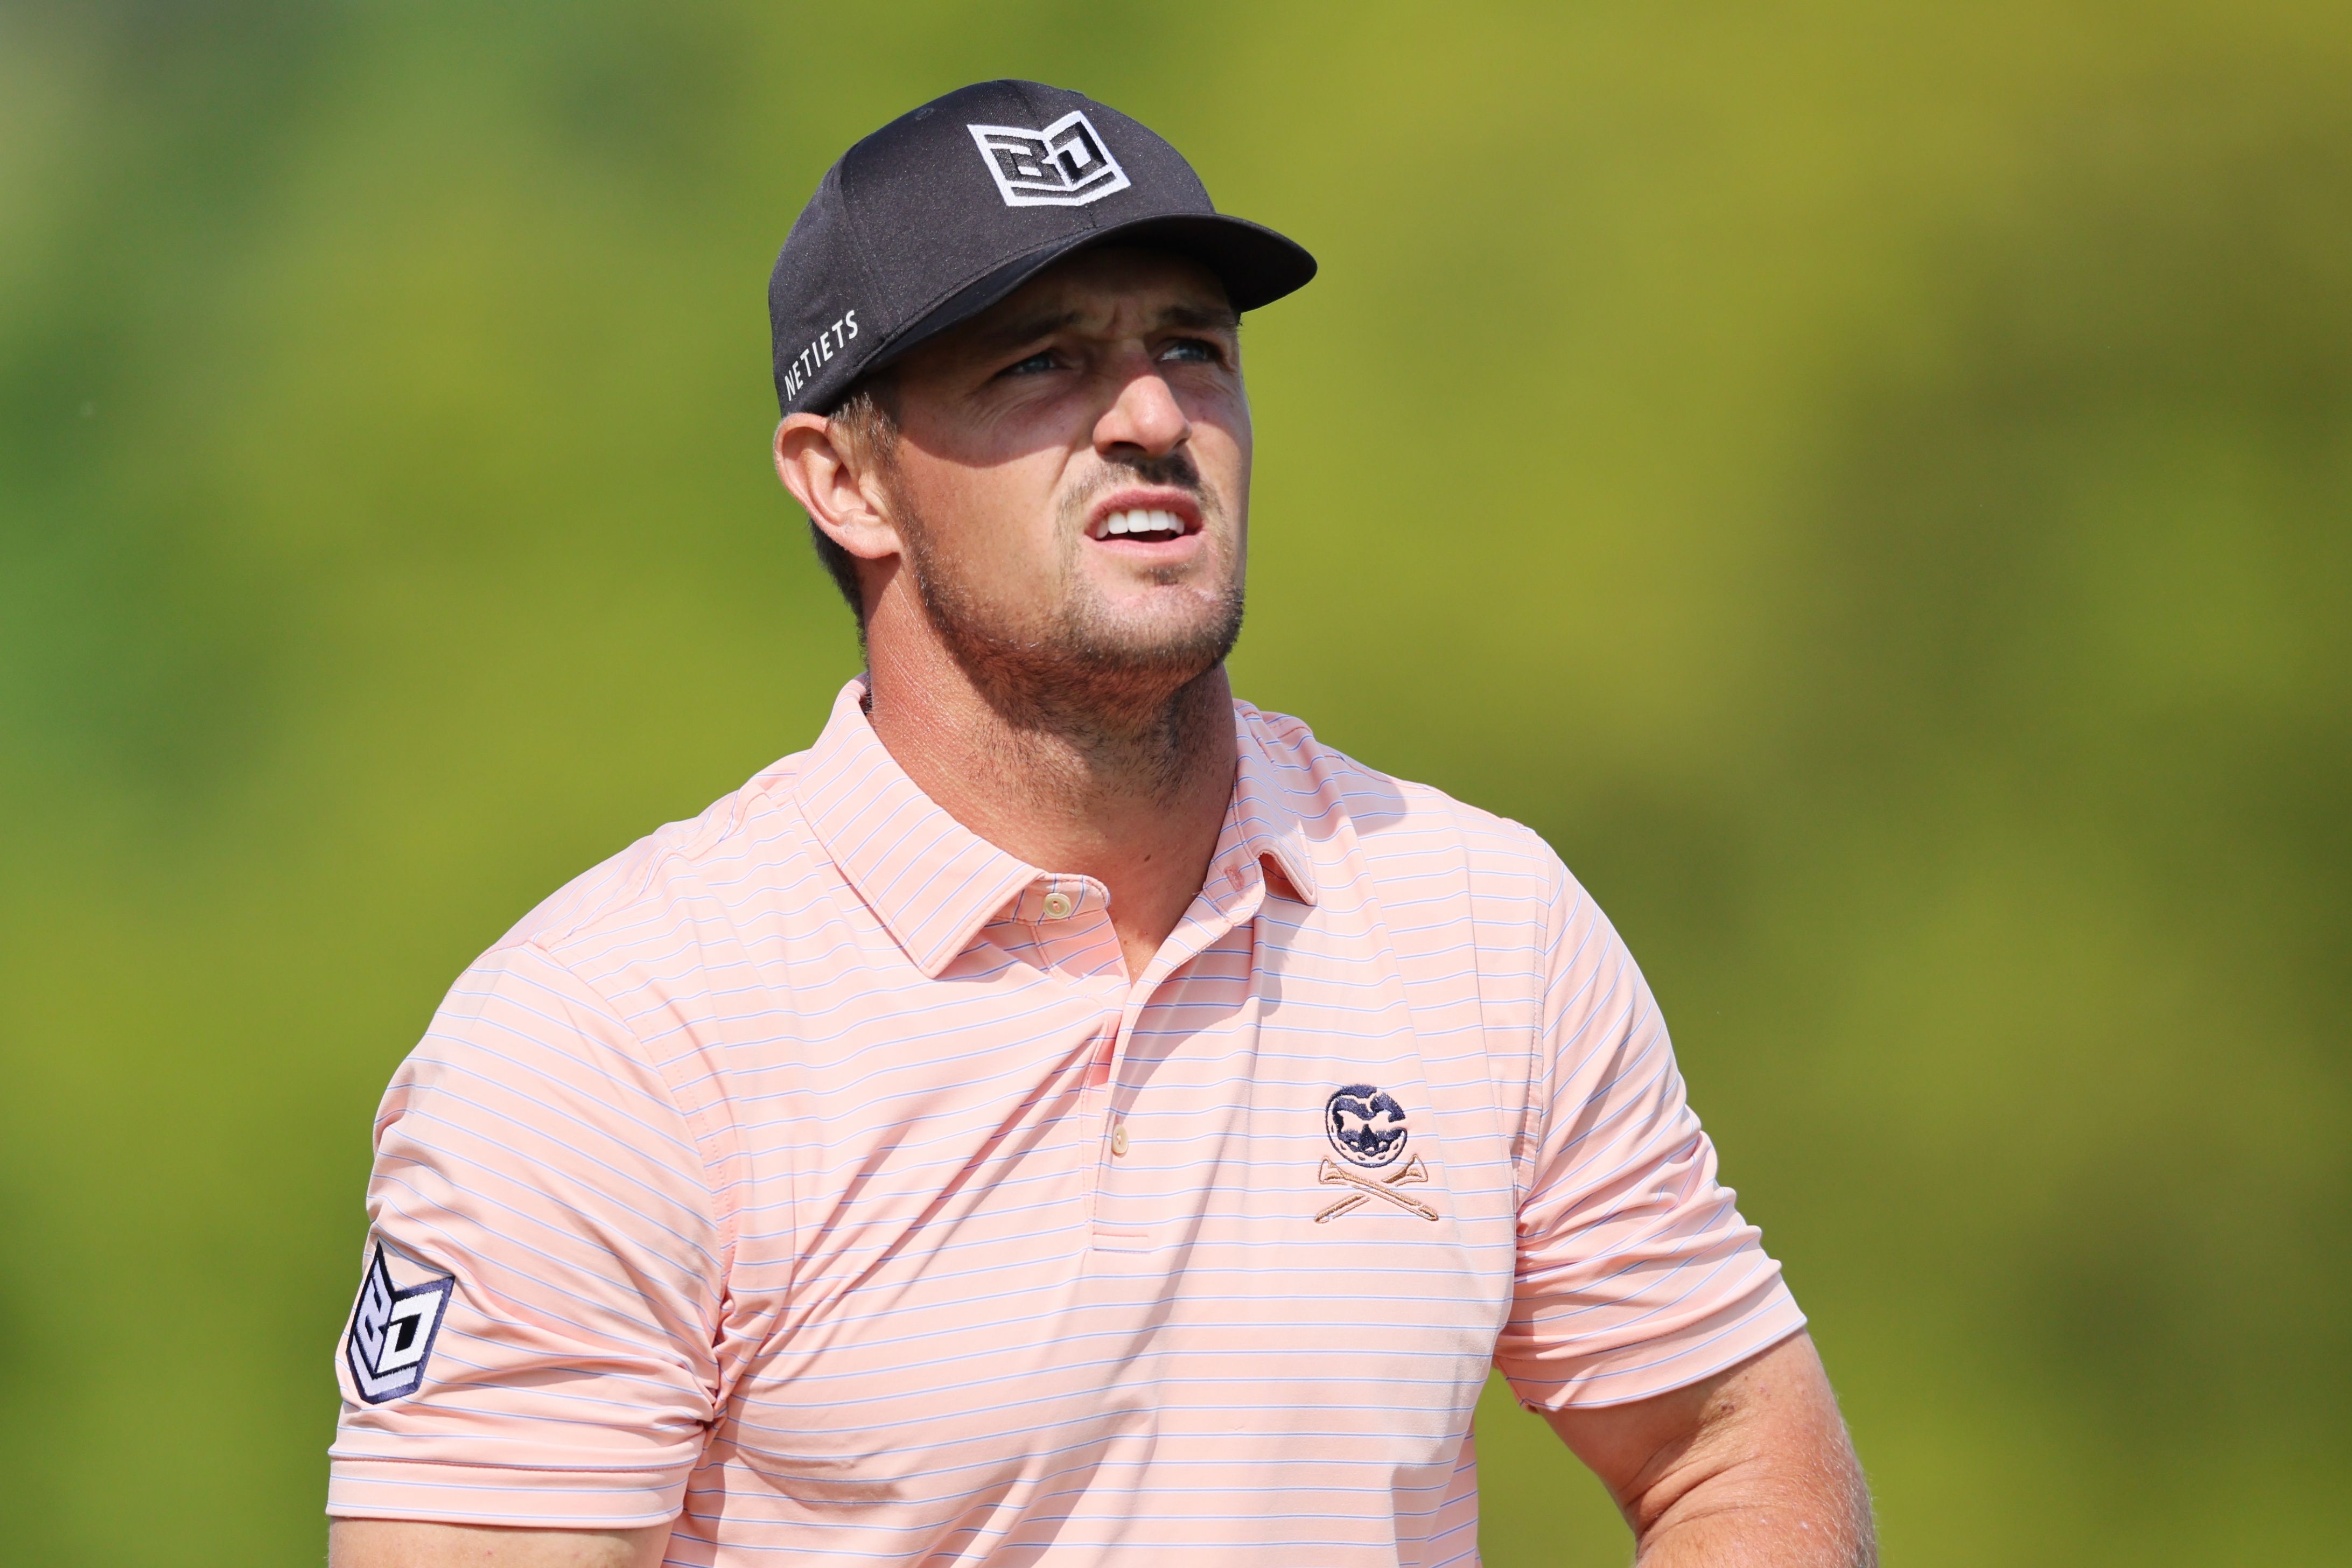 Bryson DeChambeau of the United States watches his tee shot on the ninth hole during the first round of the 2023 PGA Championship at Oak Hill Country Club on May 18, 2023 in Rochester, New York.